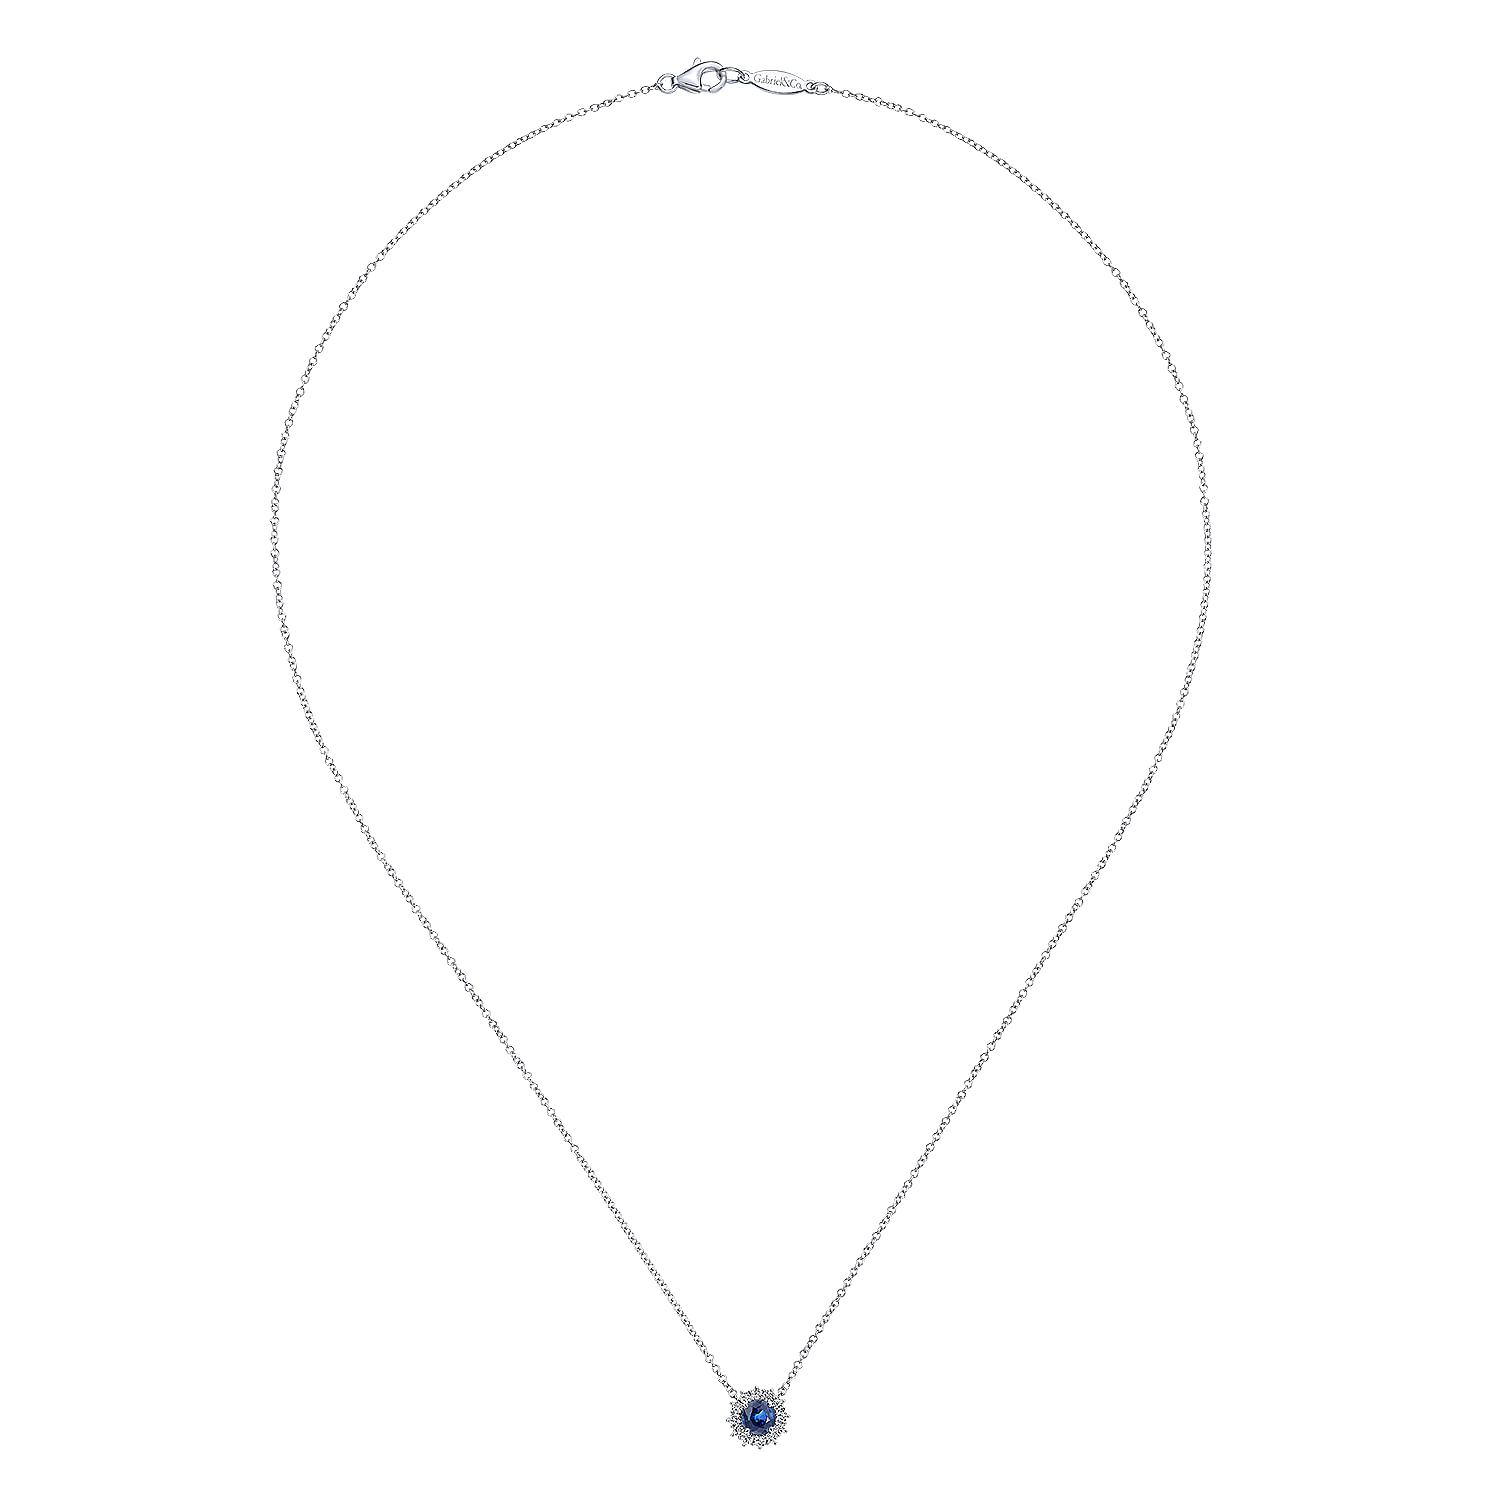 18 inch 14K White Gold Round Sapphire and Diamond Halo Pendant Necklace